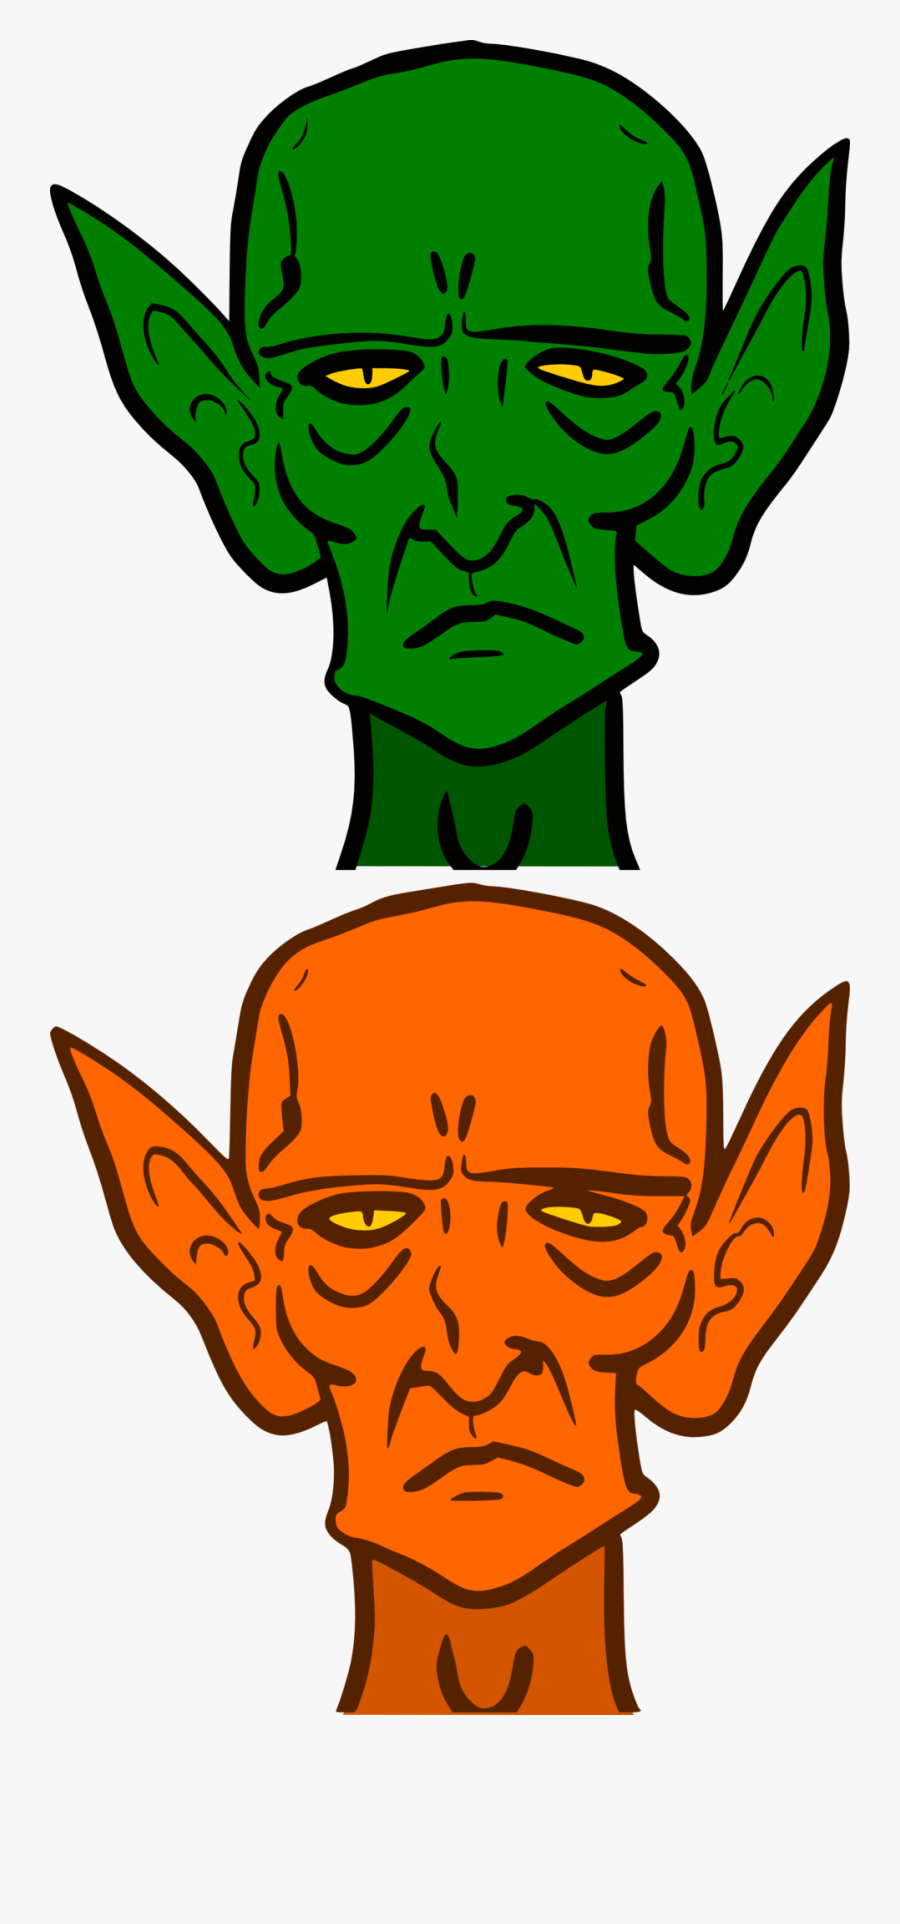 Green Alien With Pointy Ears, Transparent Clipart